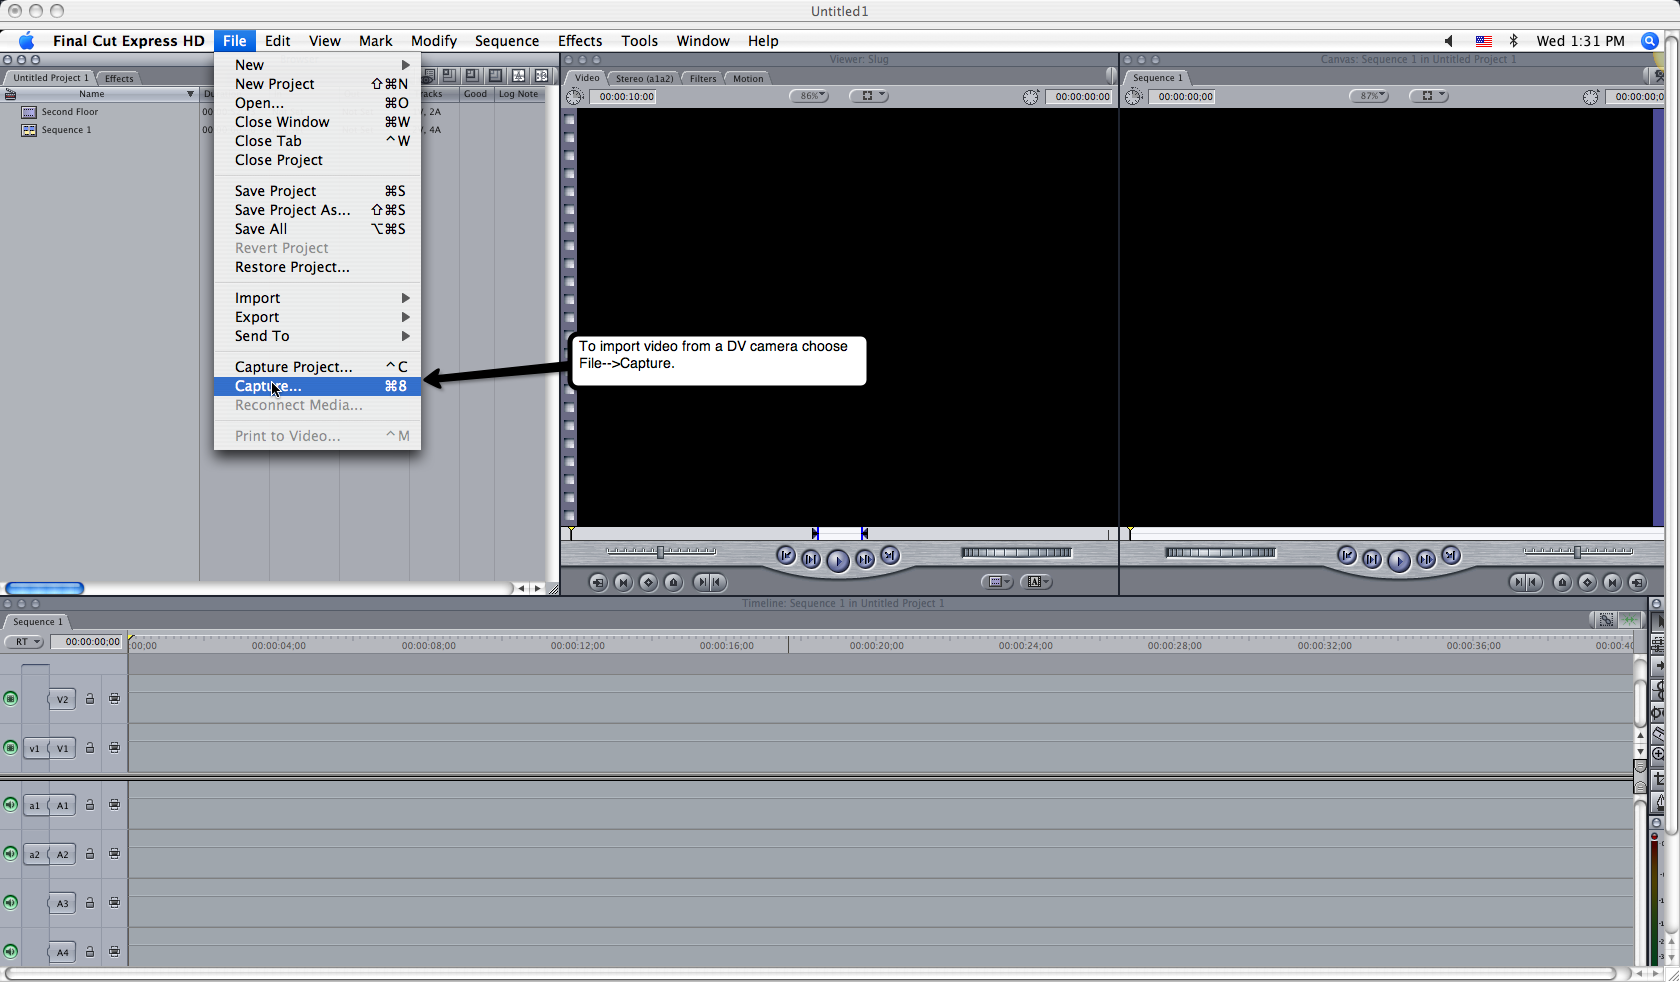 Visual guide to importing video into Final Cut Express HD step 1.